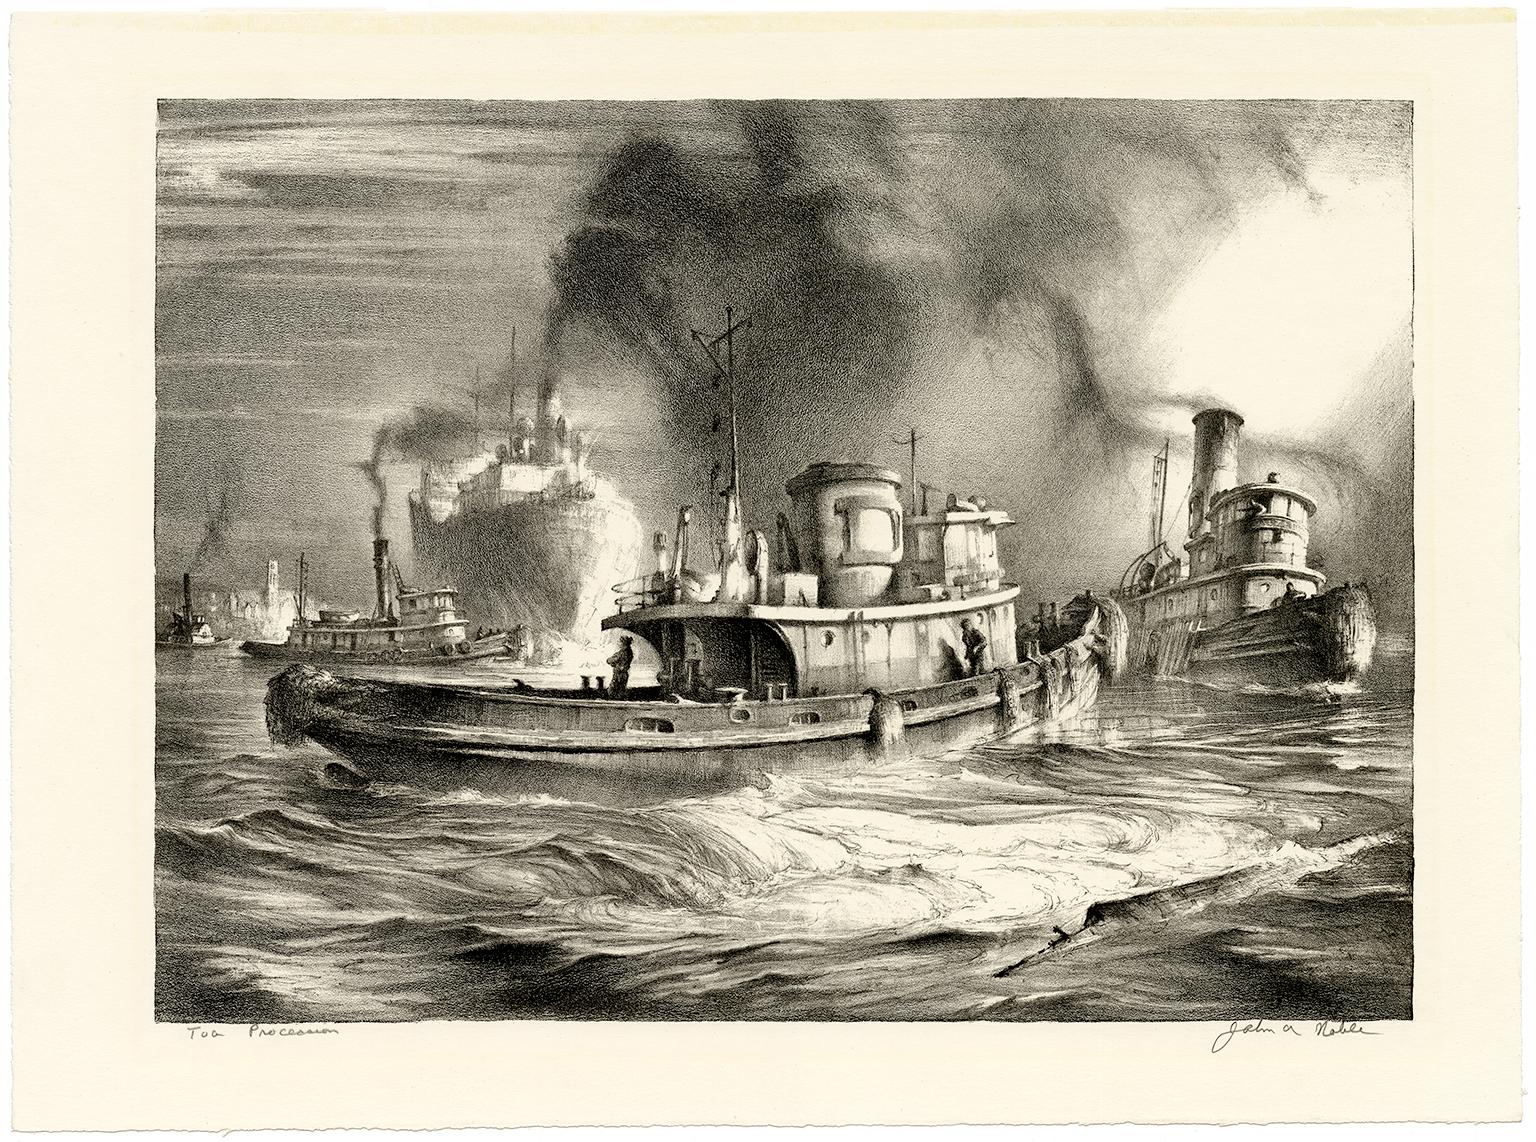 Tug Procession, Four Generations of Tugs off Staten Island - Print by John A. Noble